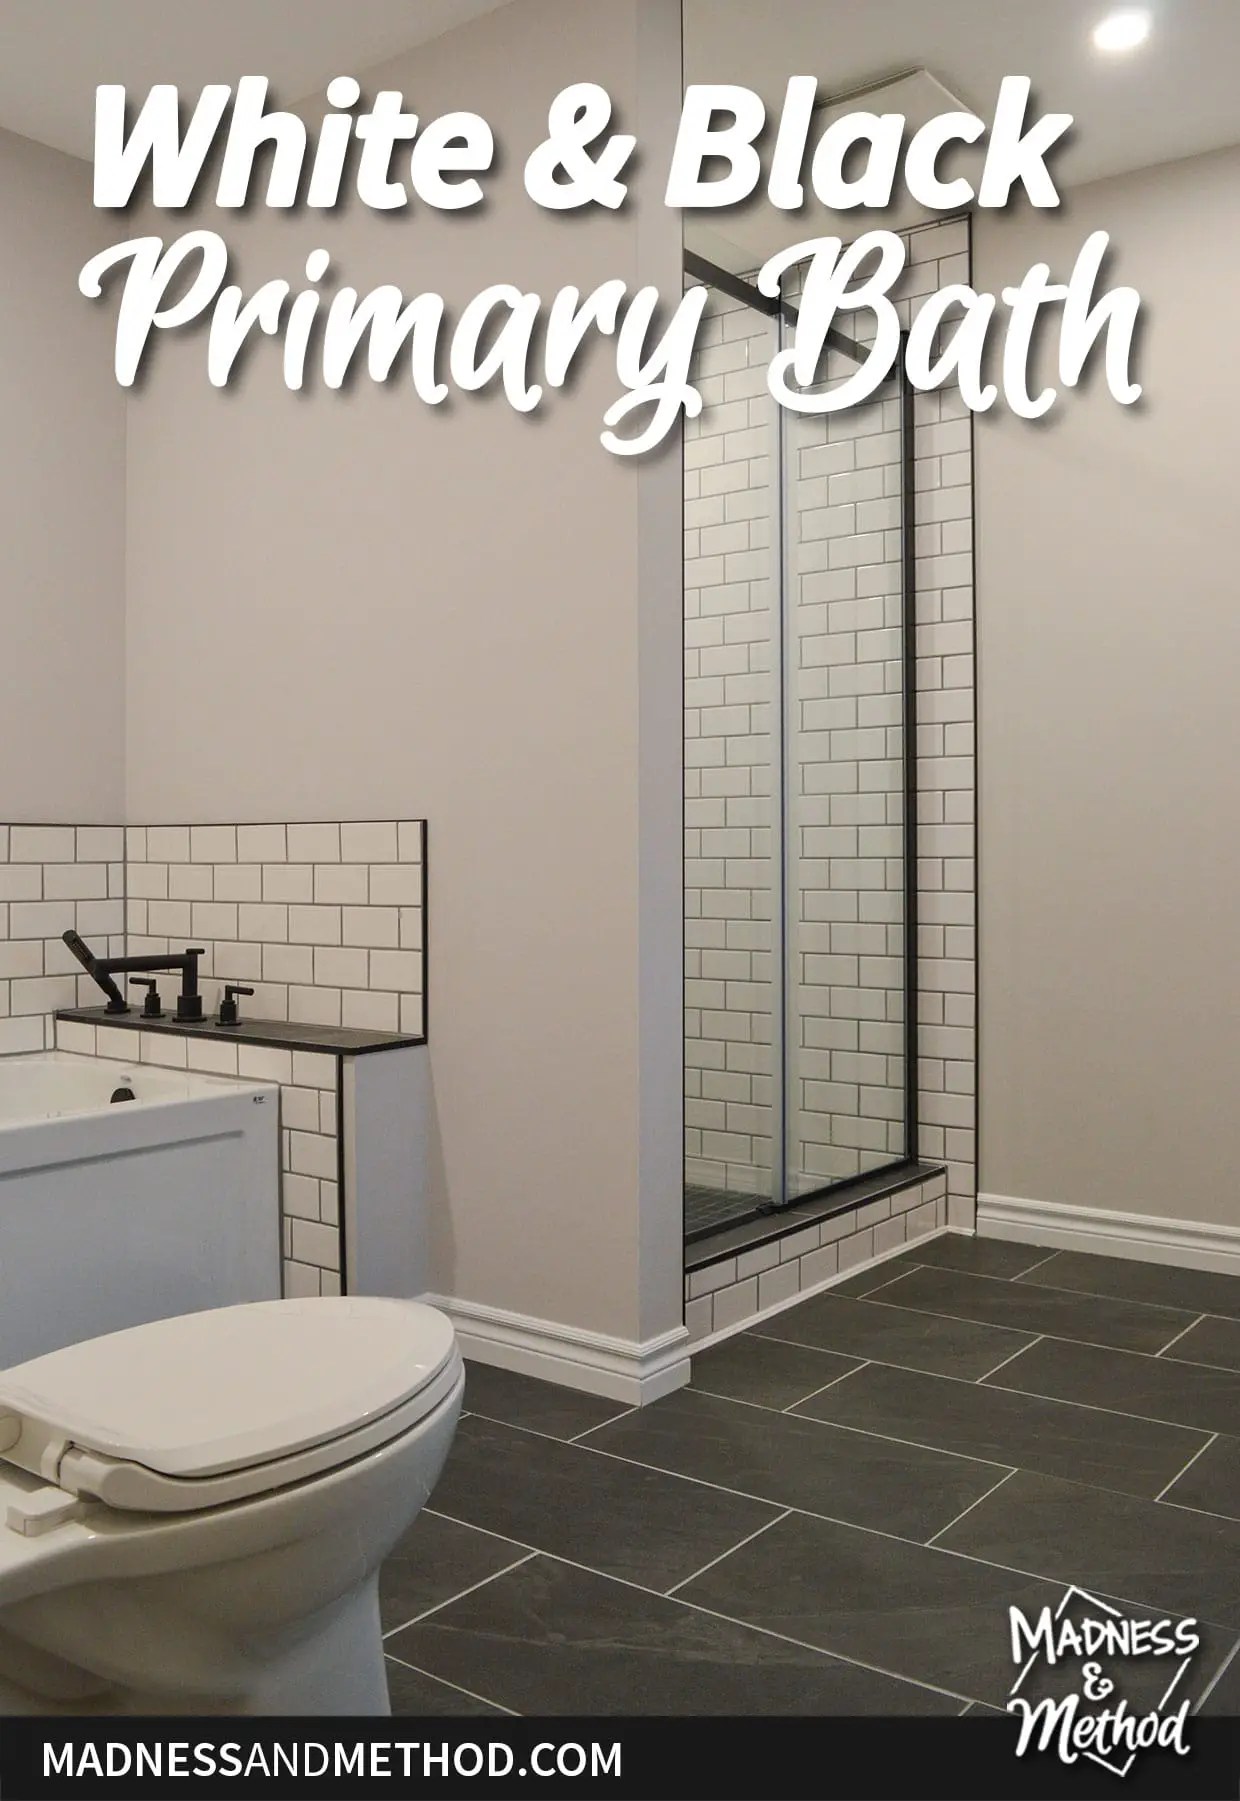 white and black primary bath text overlay with shower and tub